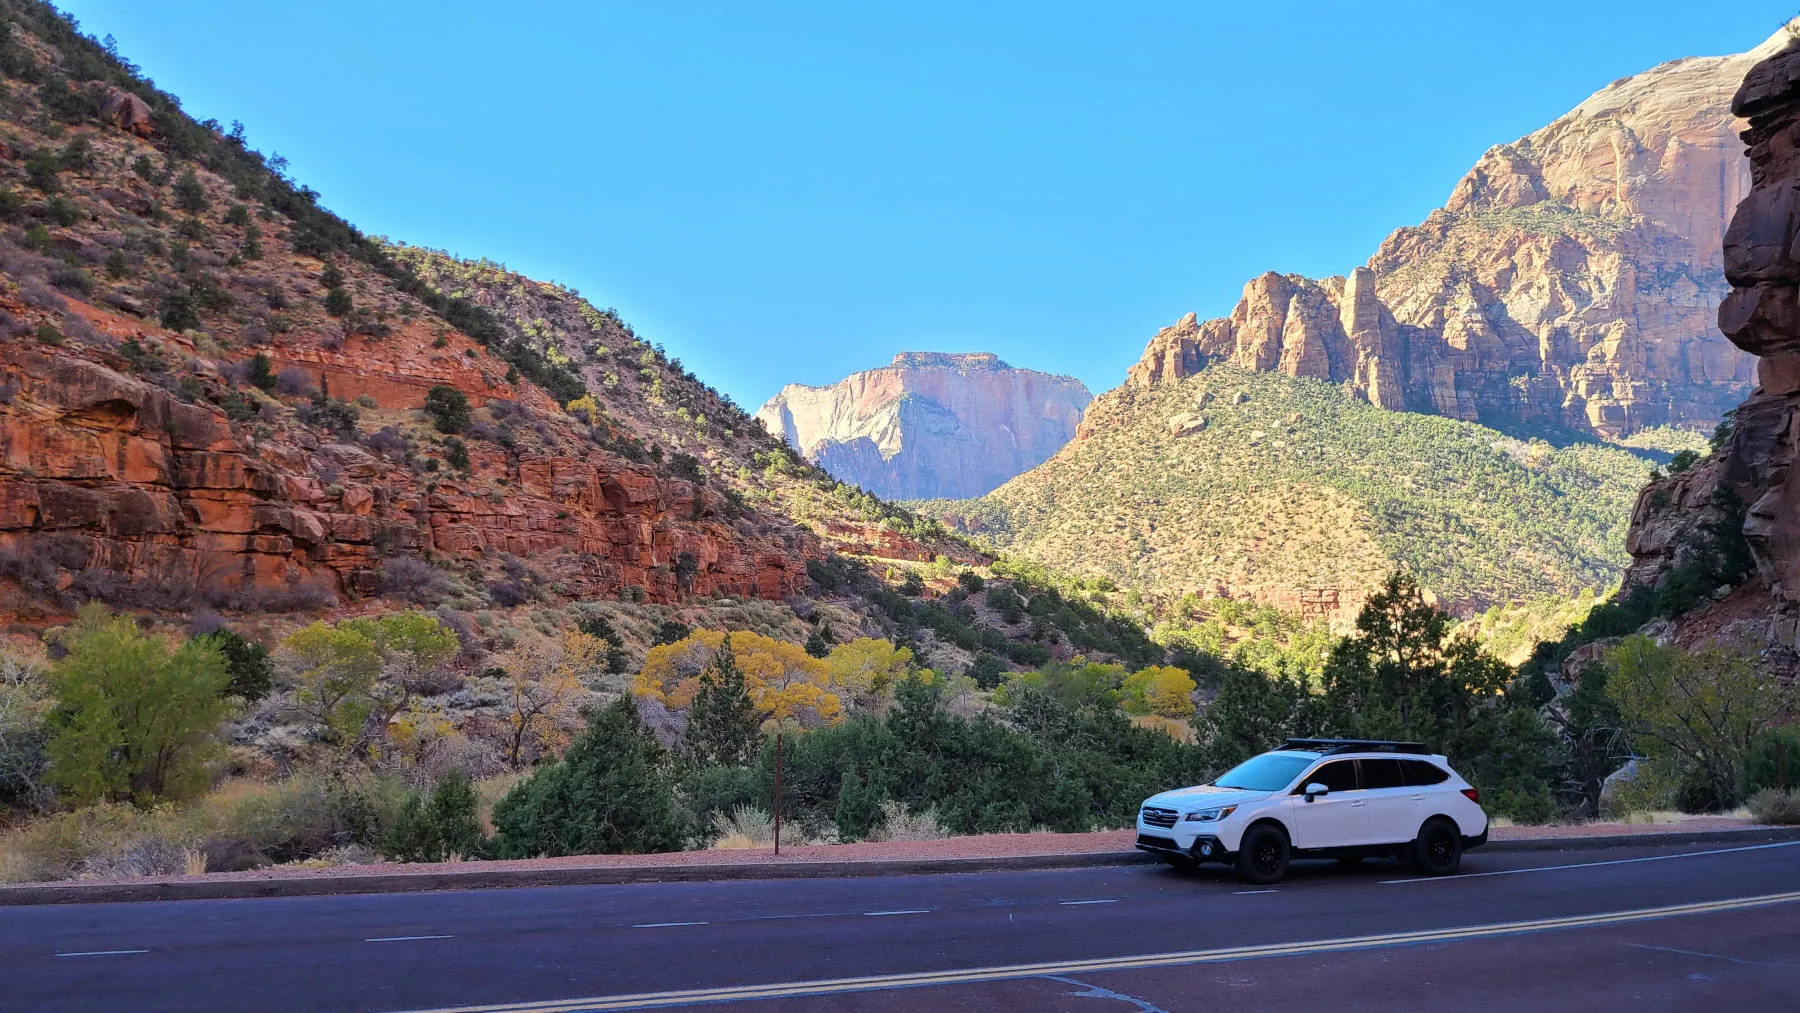 Our Subaru Outback helped us explore during a visit to Zion National Park